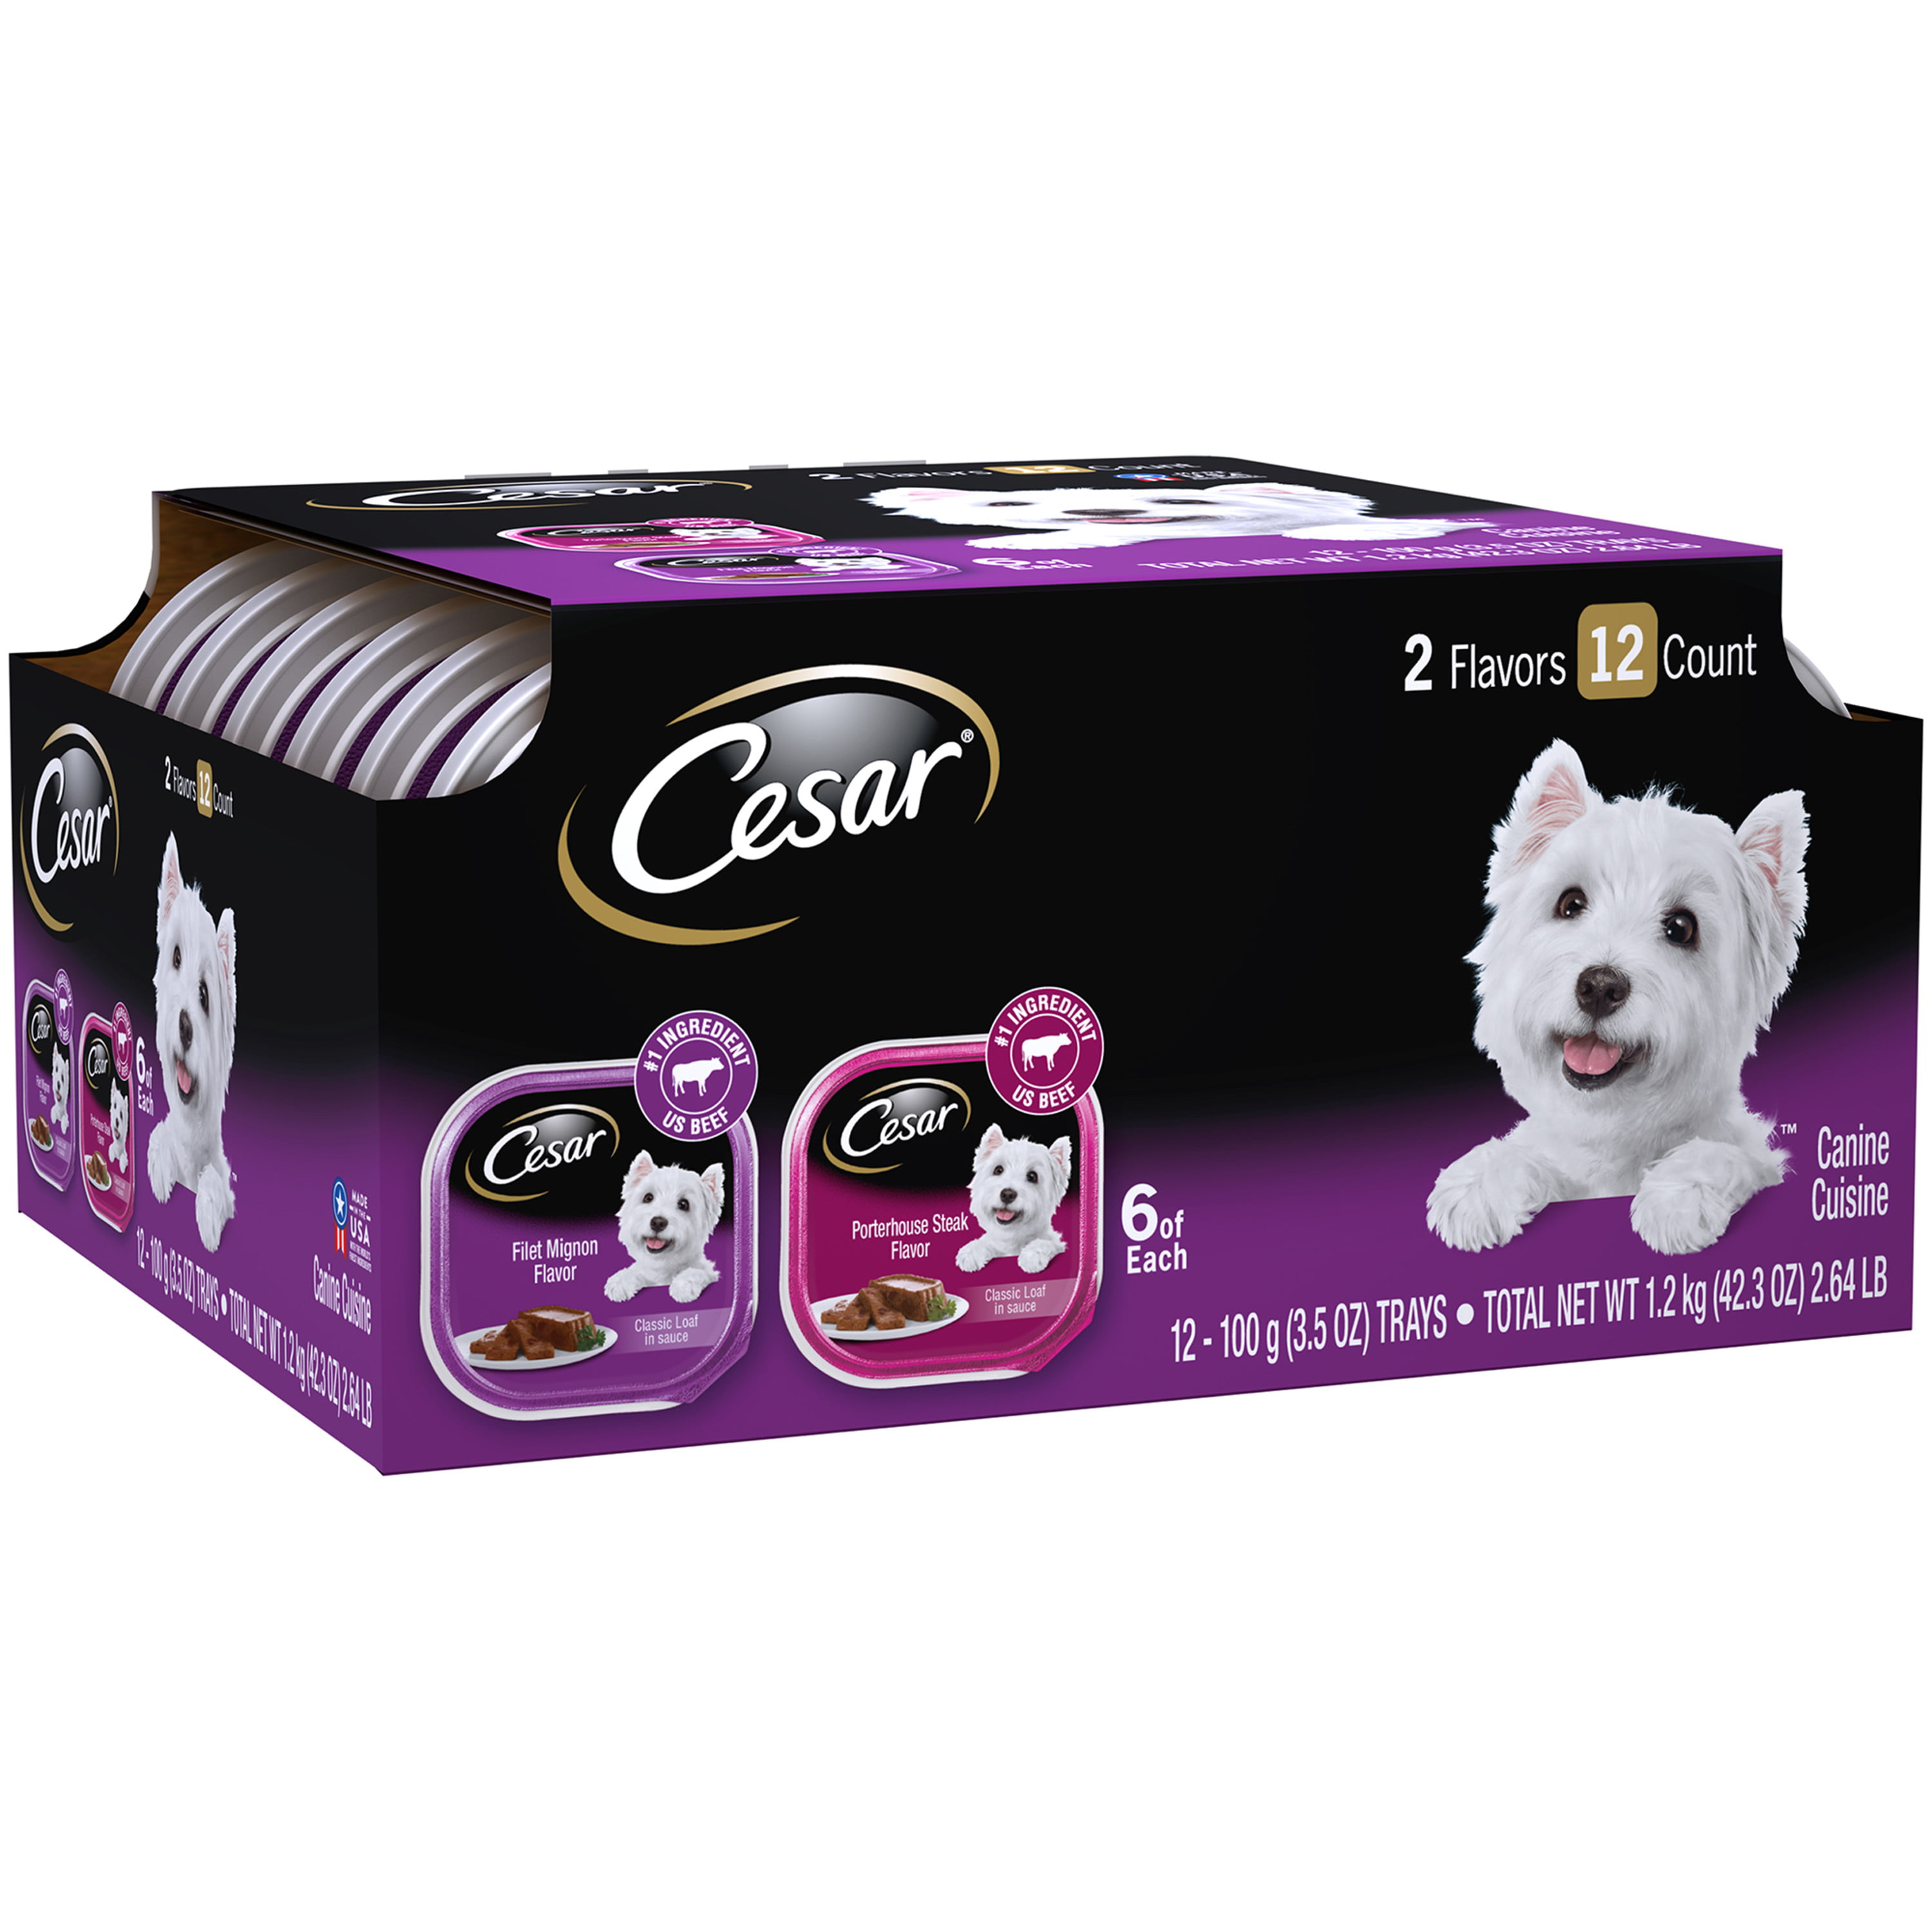 CESAR Soft Wet Dog Food Classic Loaf in 